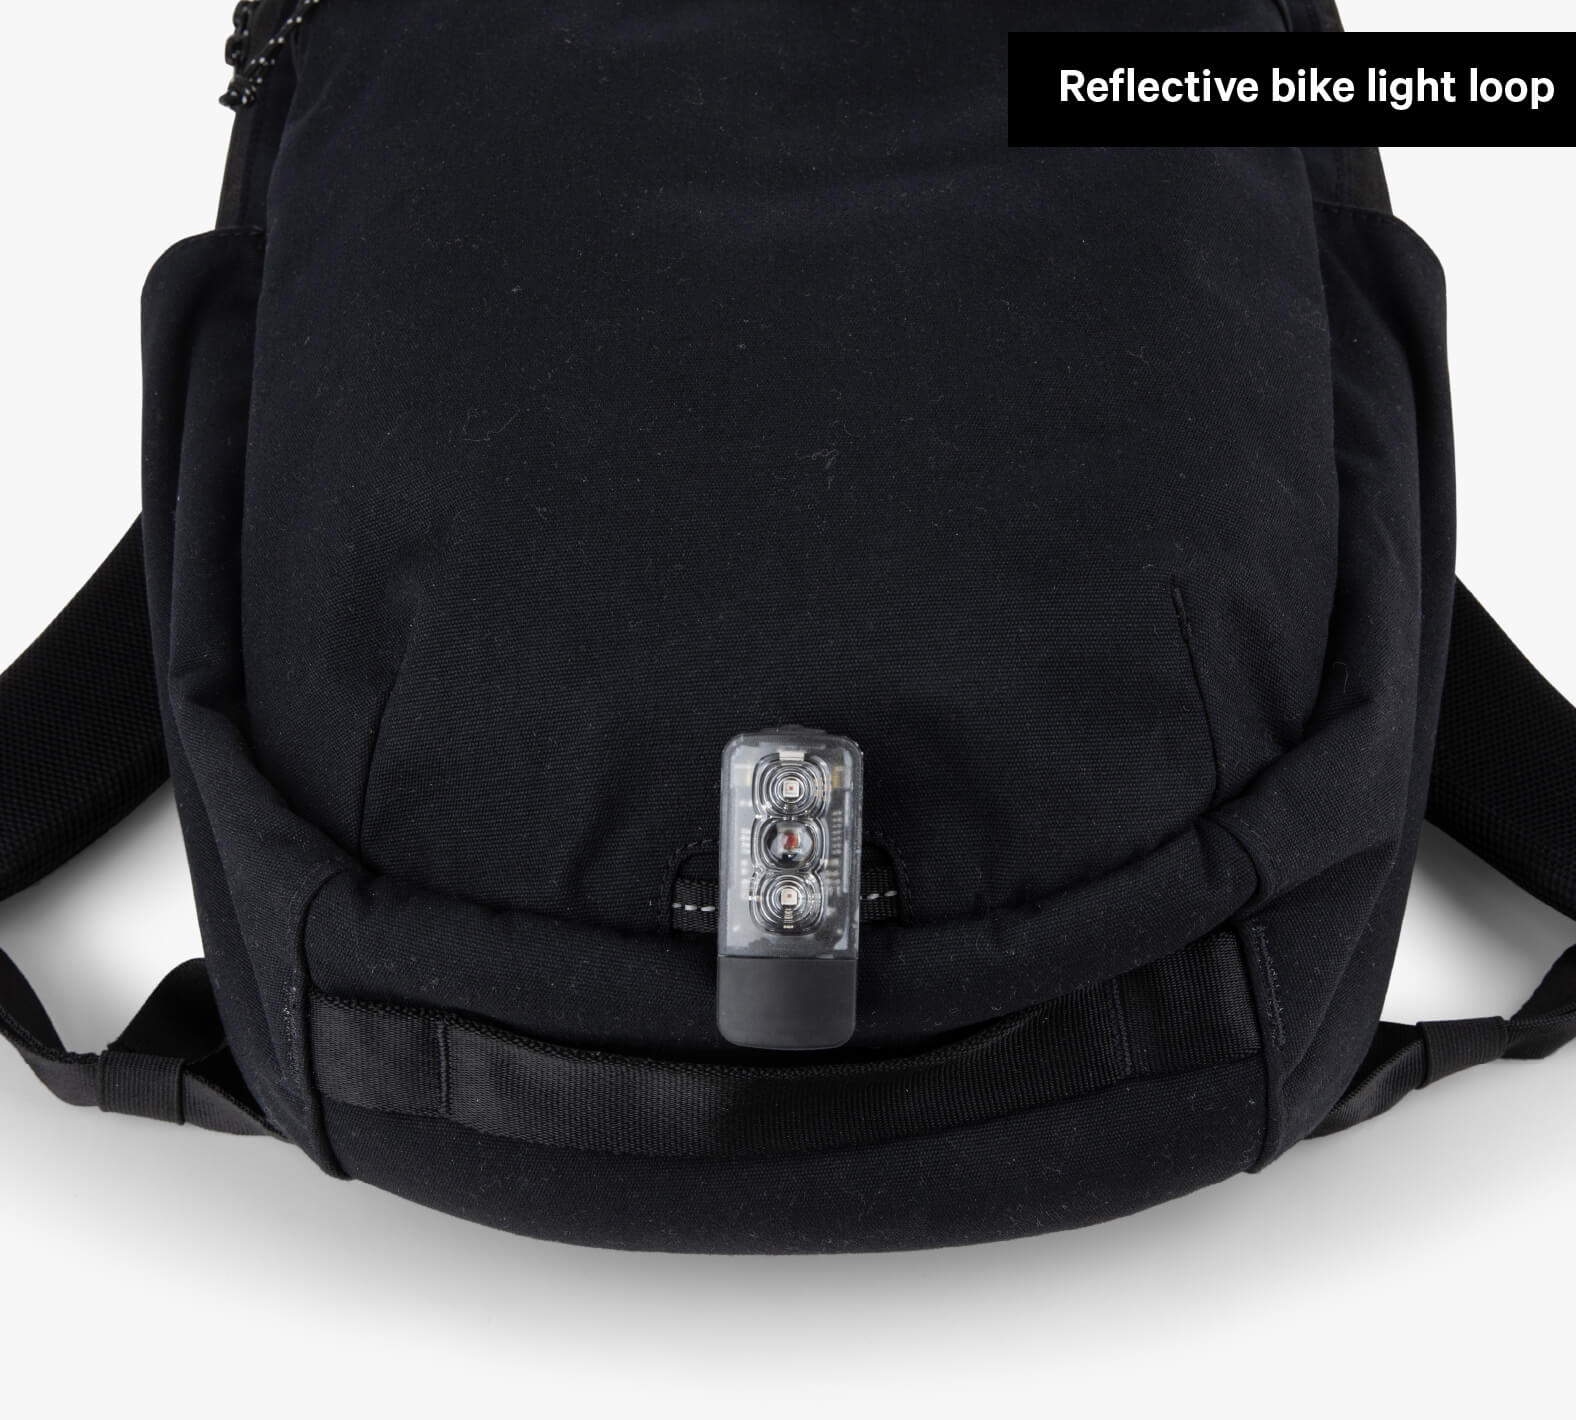 Everyday 22L Backpack